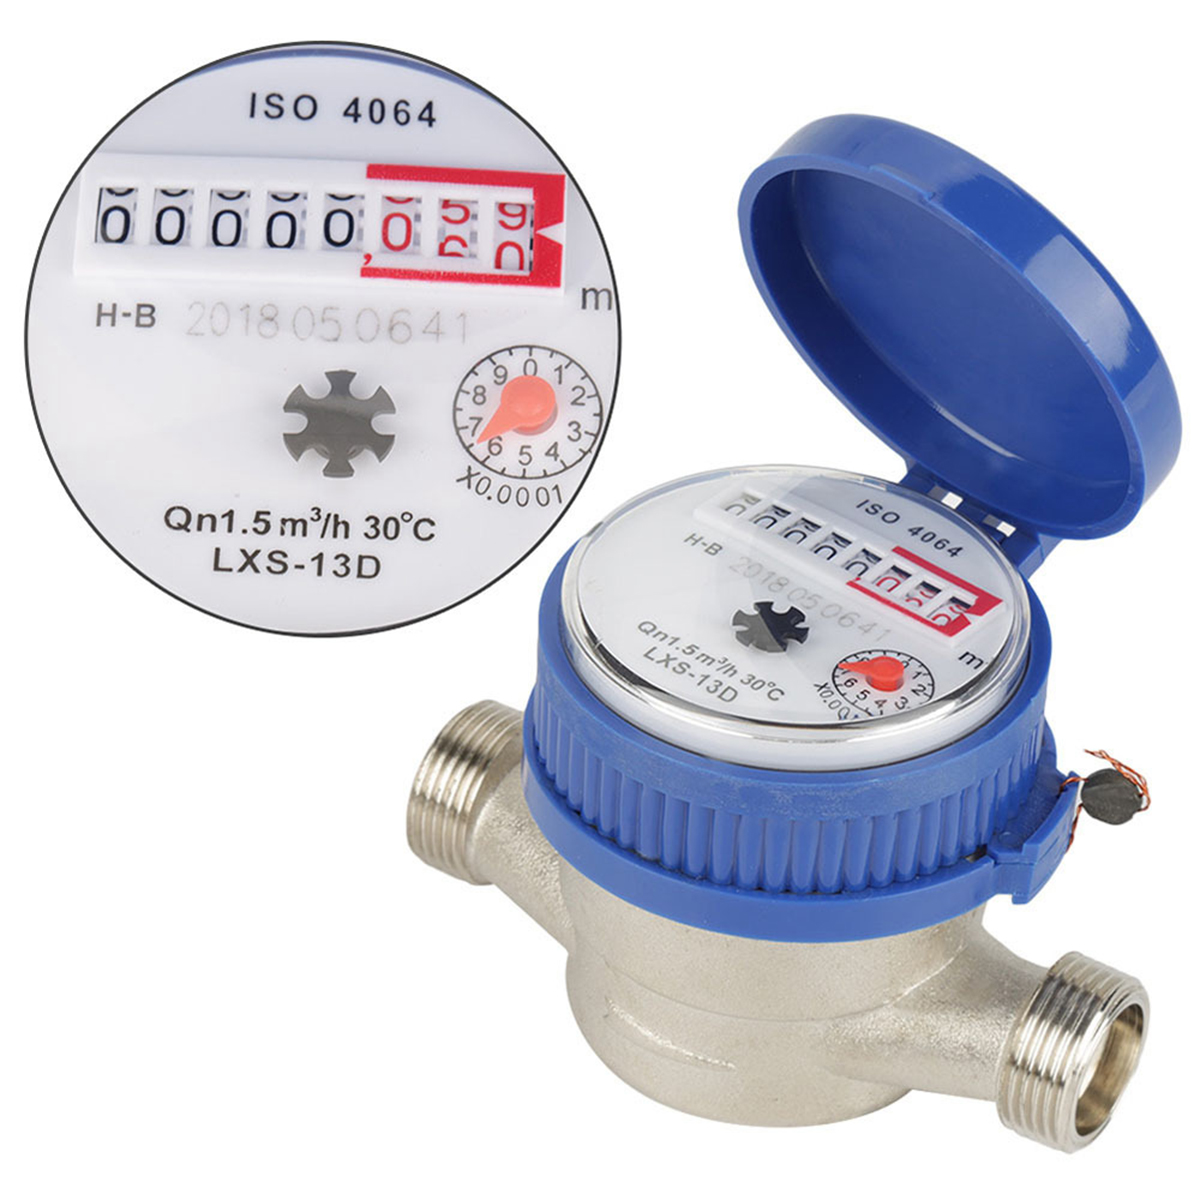 15mm 1//2 inch Cold Water Meter with Fittings for Garden /& Home Usage Metering Applications Gardening Accessories